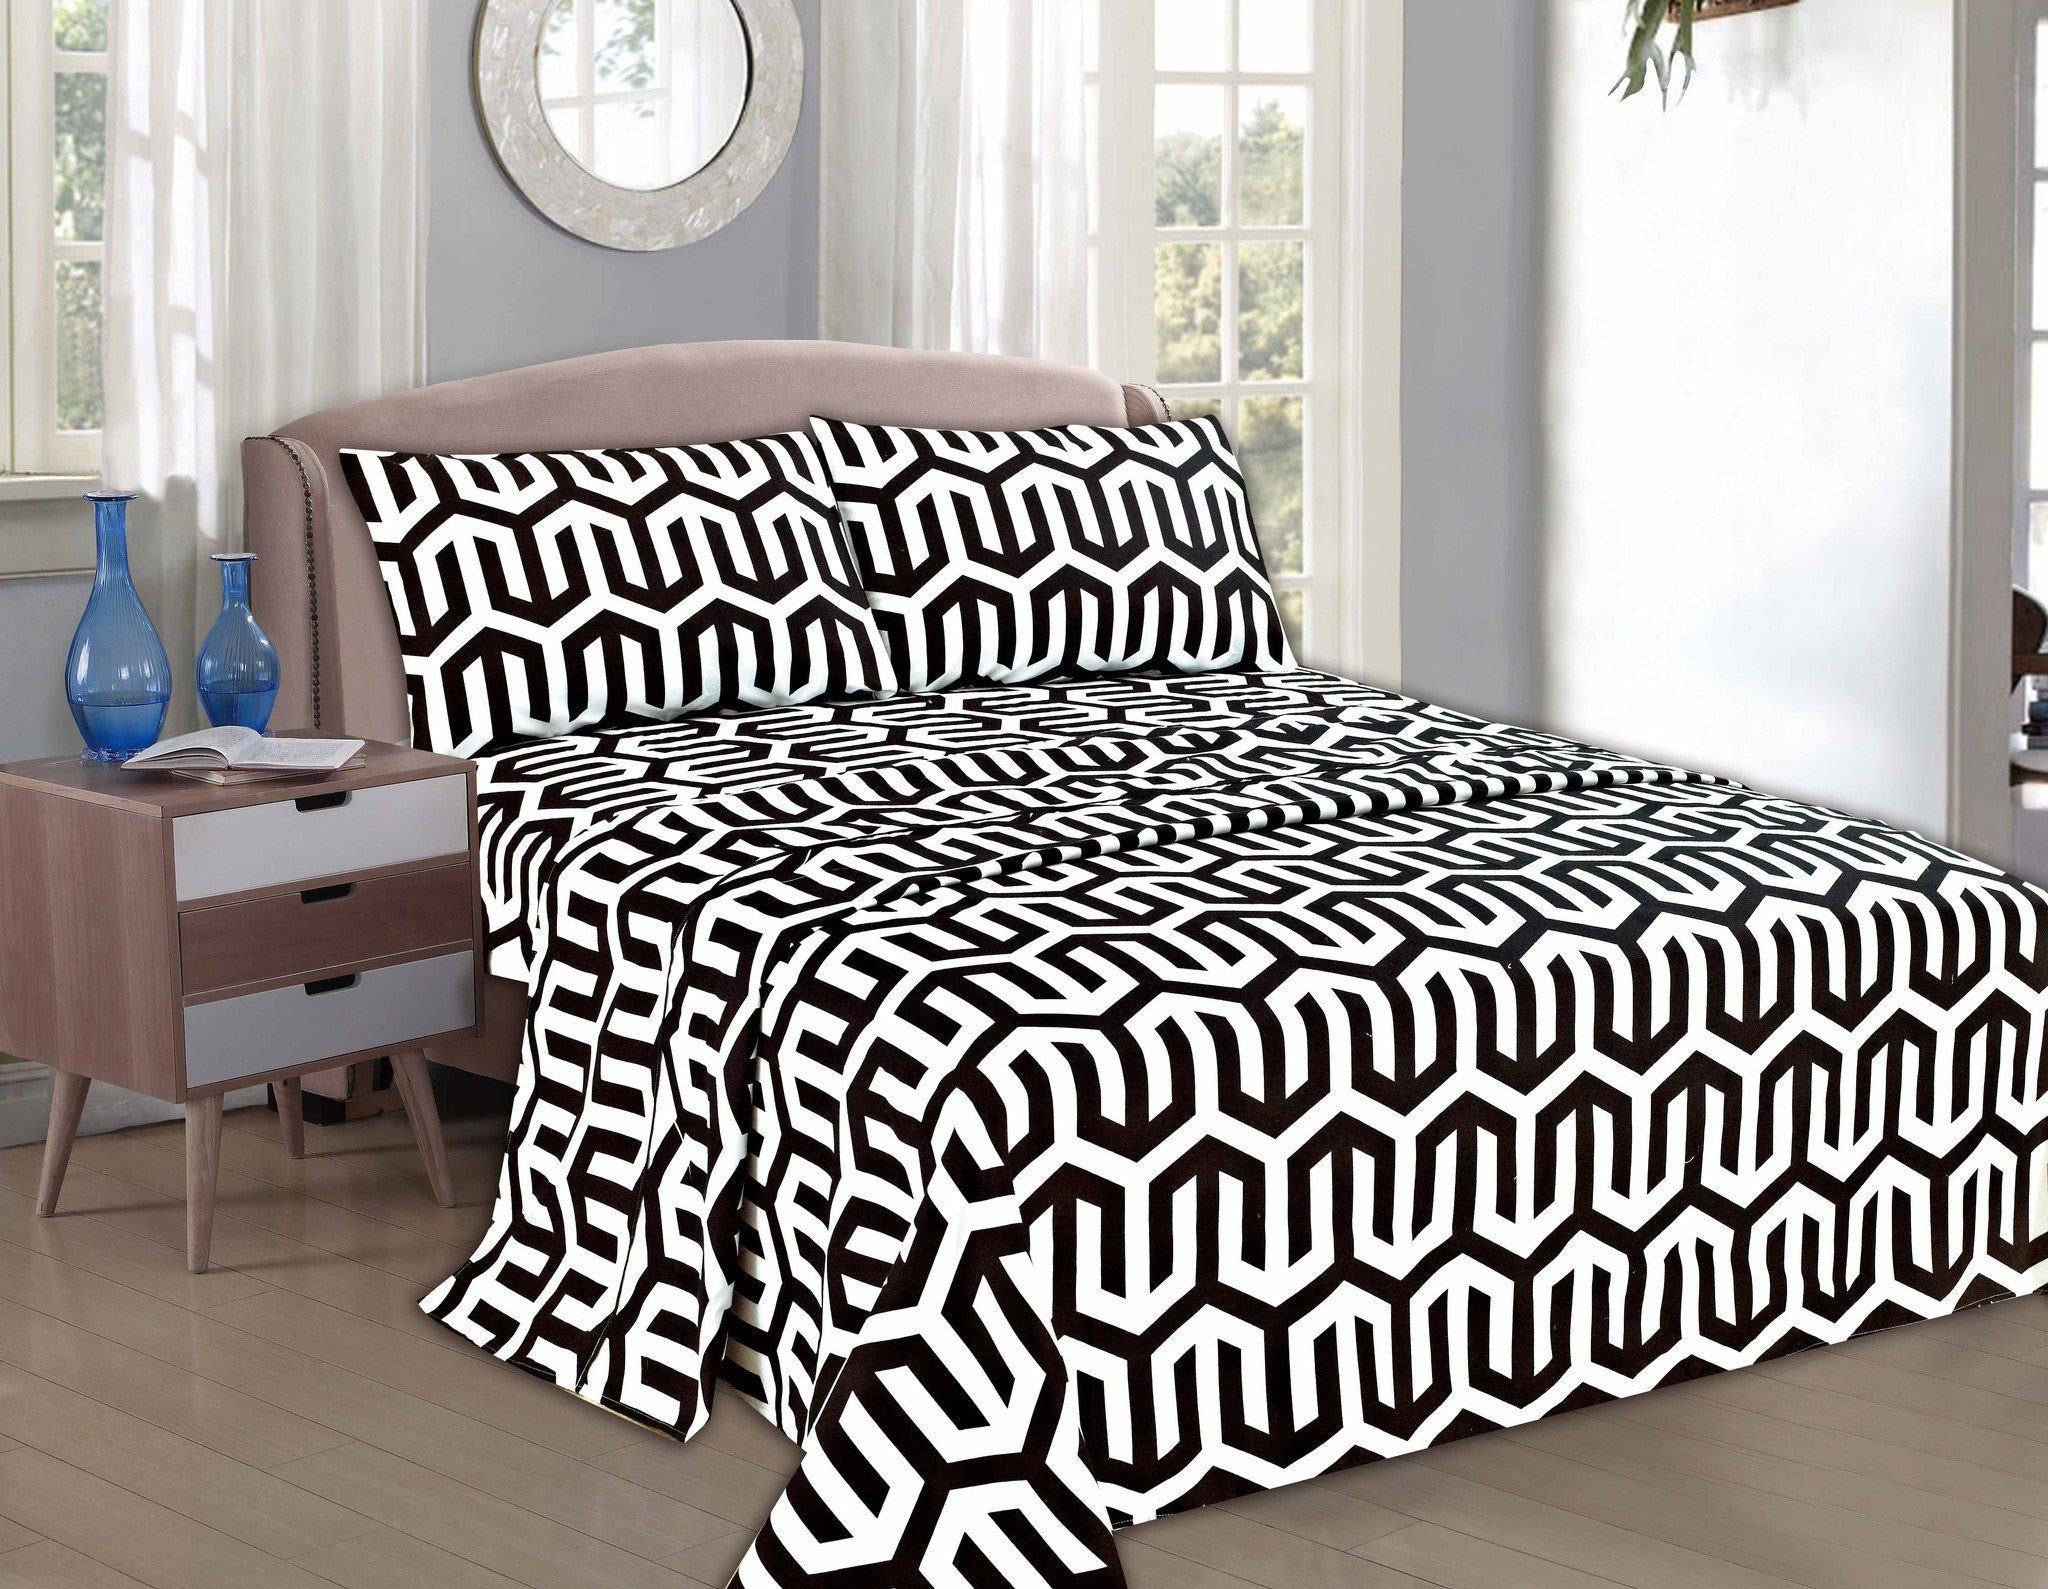 Tache Sophisticated Condo Black and White Bed Sheet Set Twin (2141FITFLT) - Tache Home Fashion